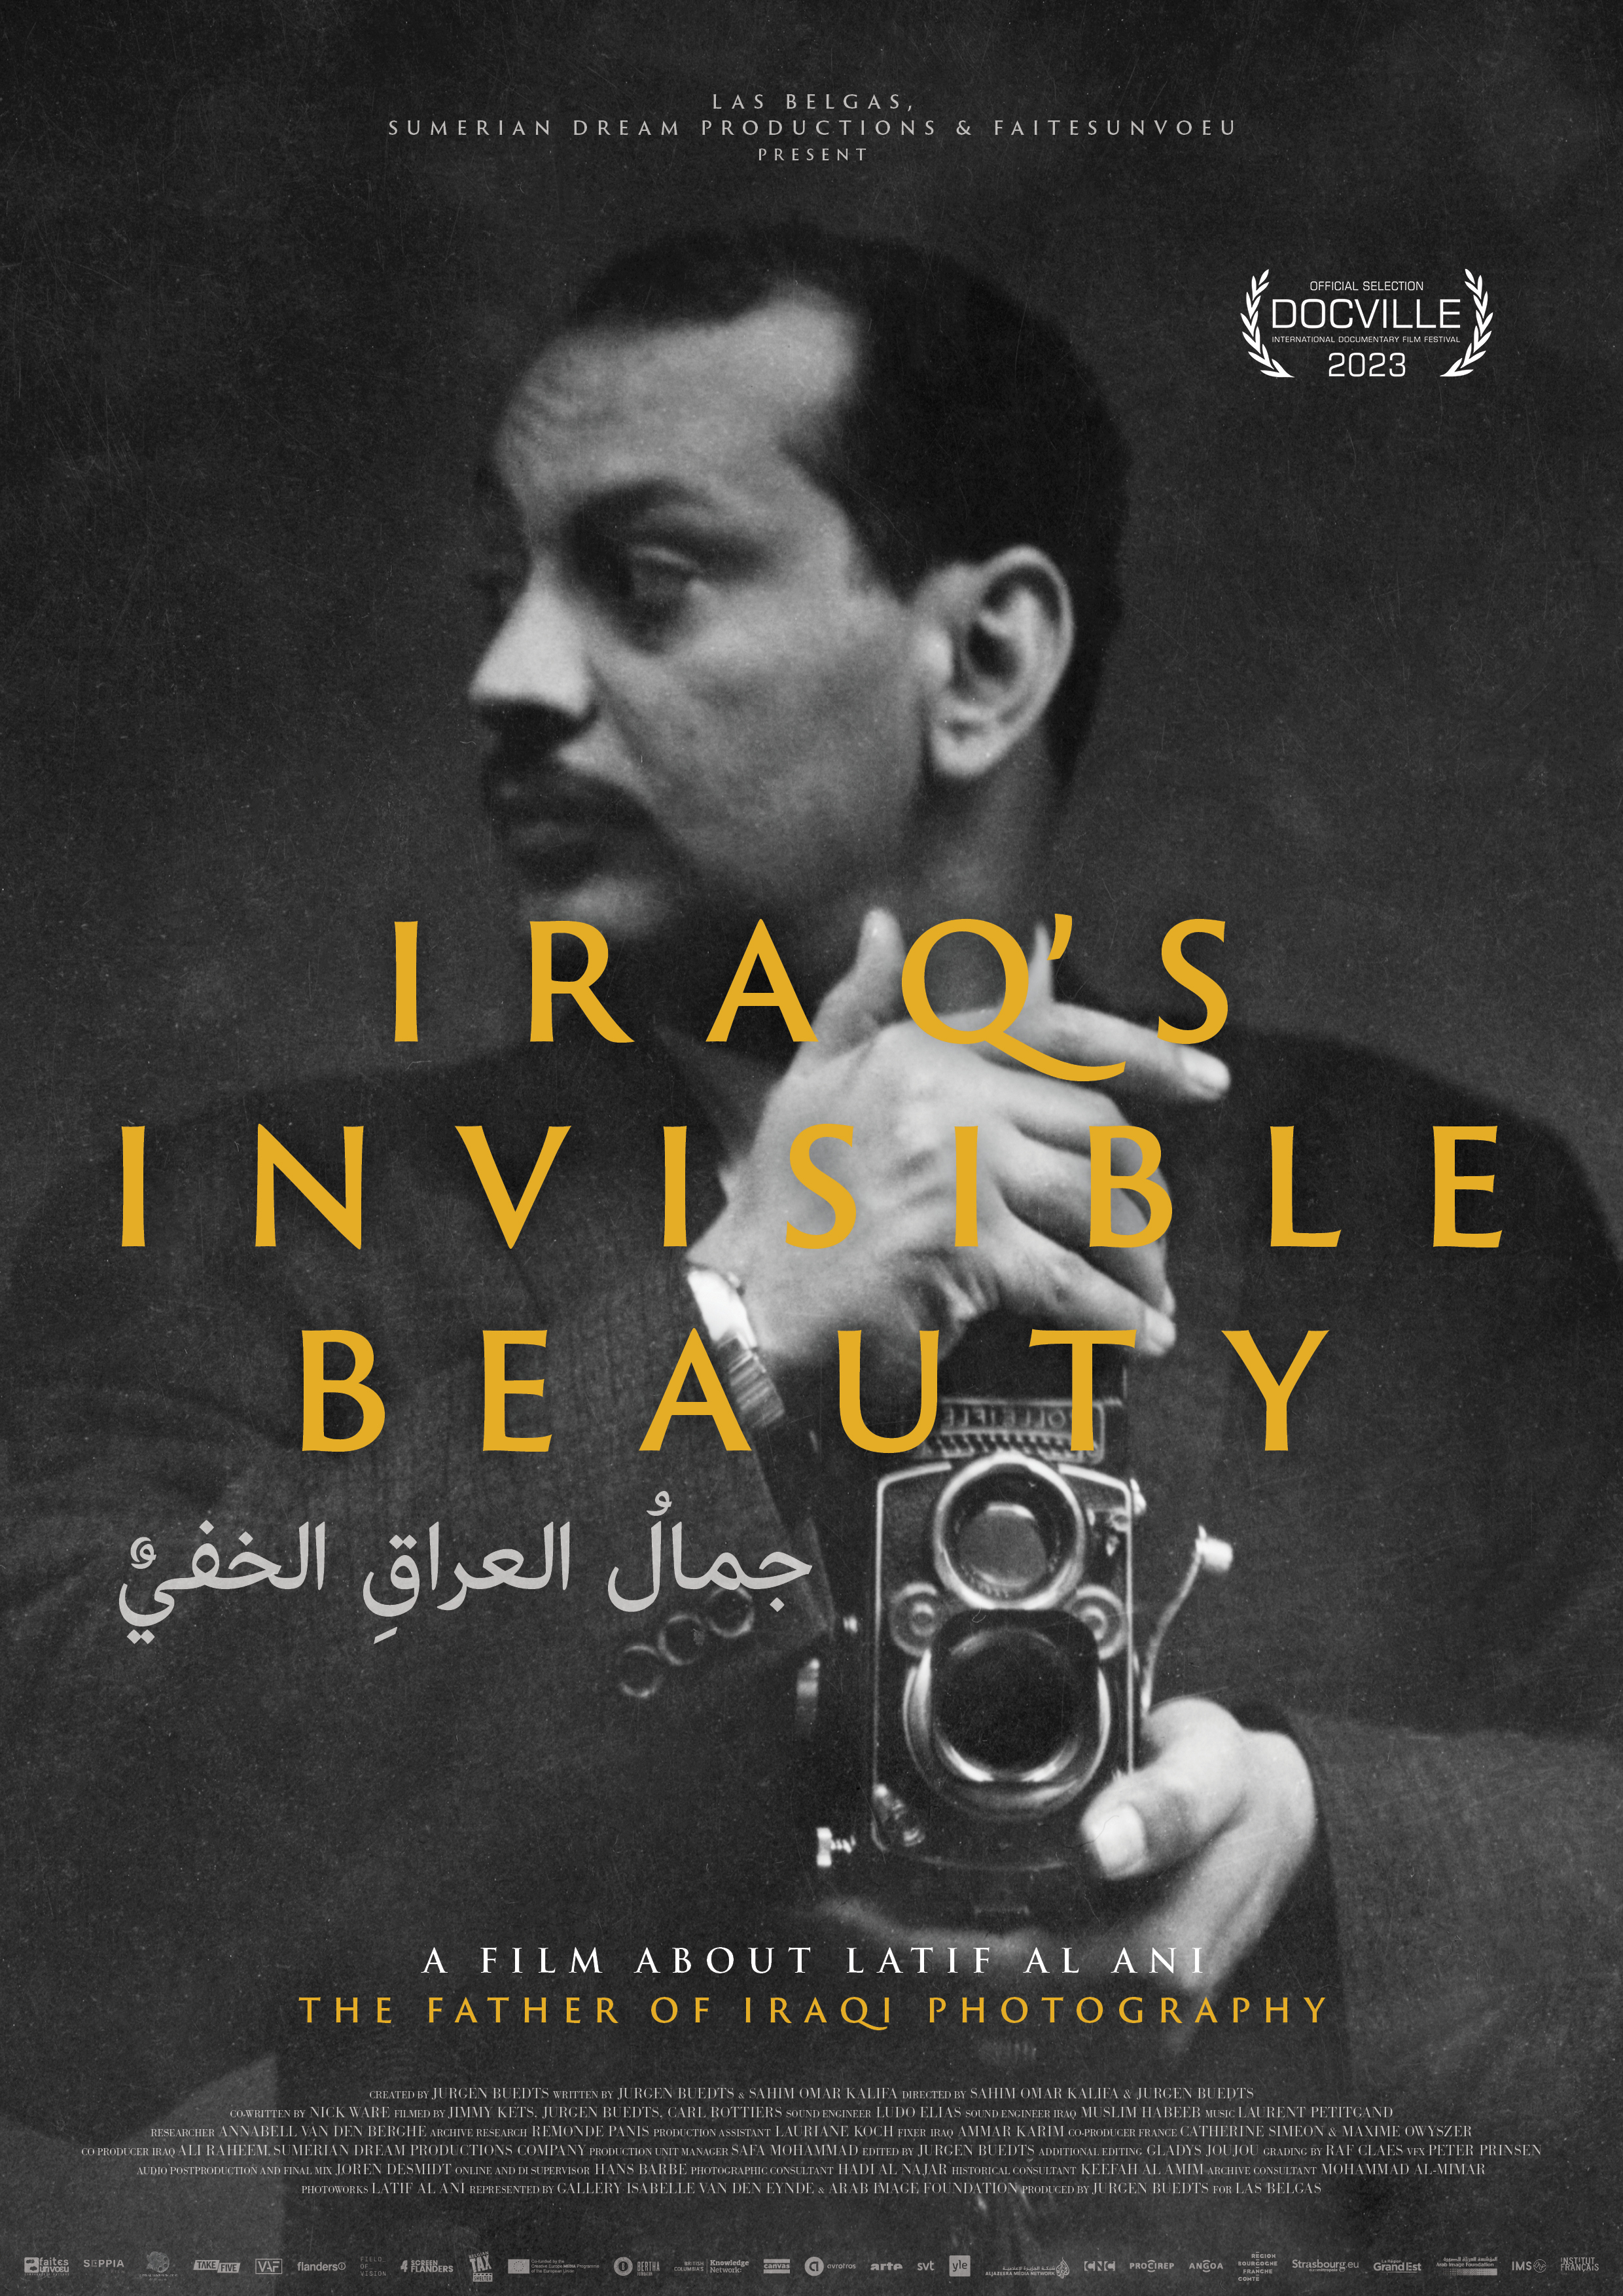 Exhibition Event: Screening of Iraq's Invisible Beauty